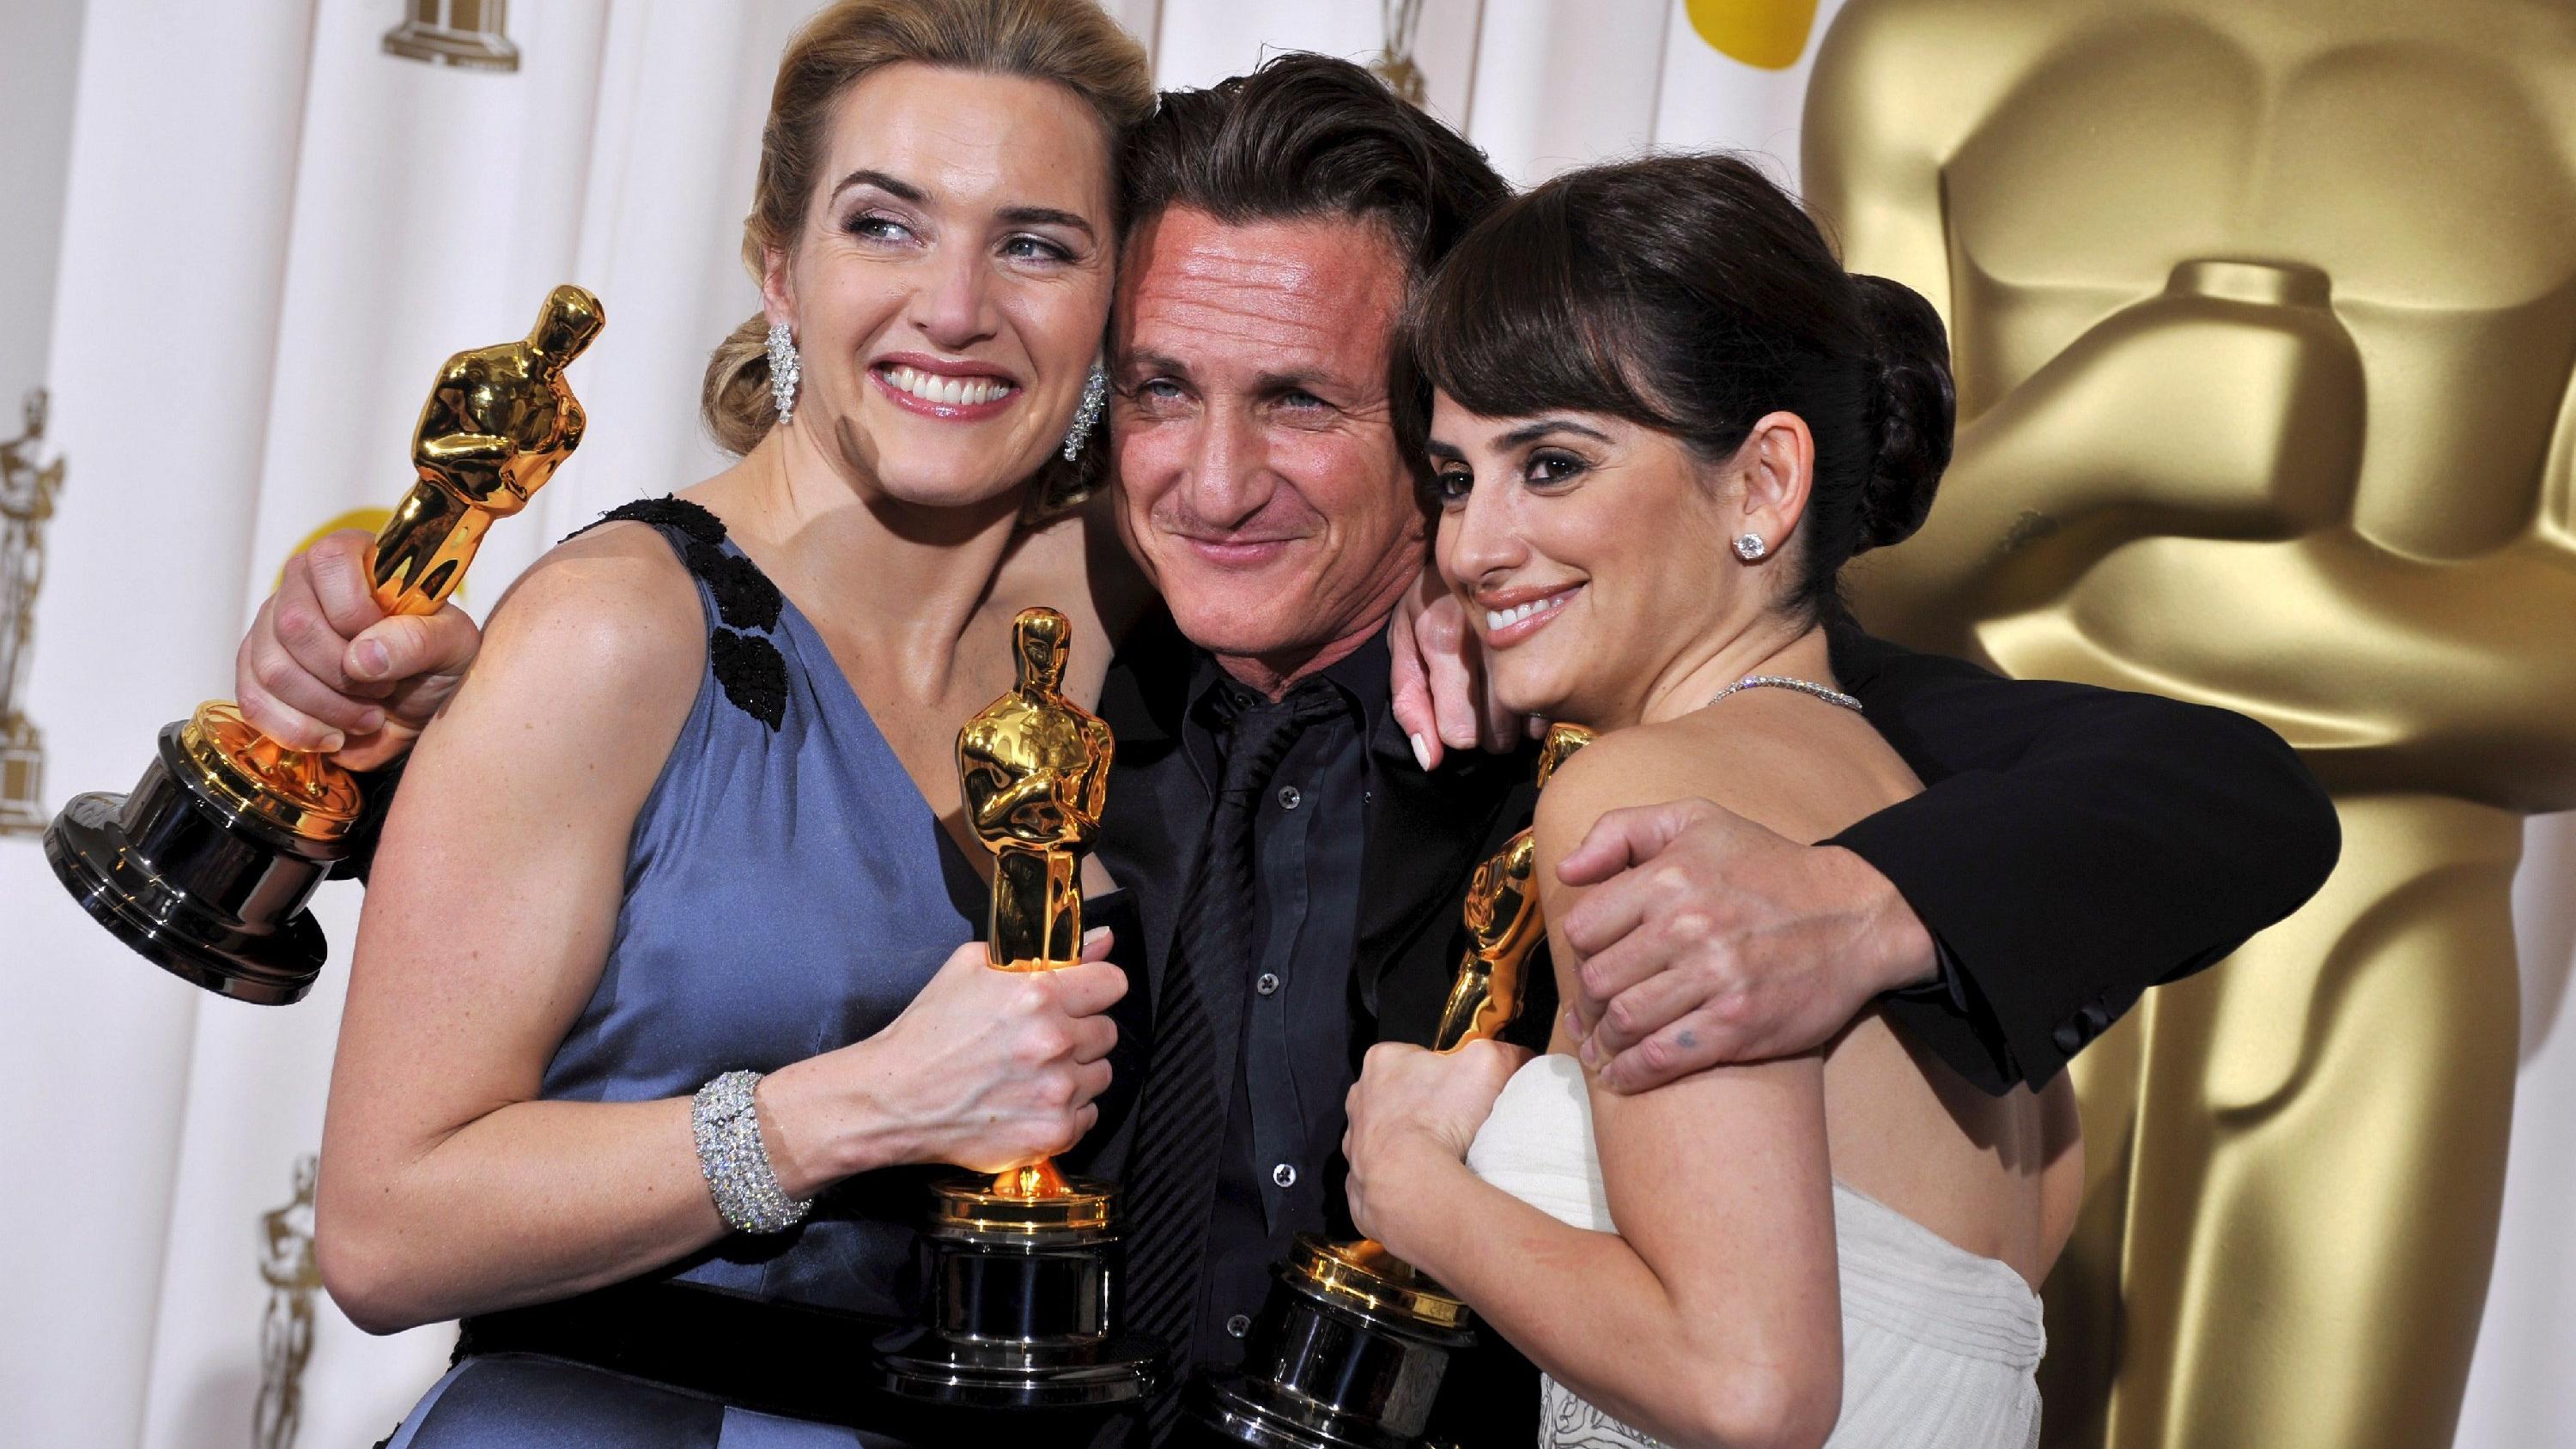 US actor Sean Penn (C), Spanish actress Penelope Cruz (R) and English actress Kate Winslet (L) hold their Oscars after winning Best Actor, Best Supporting Actress and Best Actress respectively at the 81st Academy Awards 22 February 2009 at the Kodak 